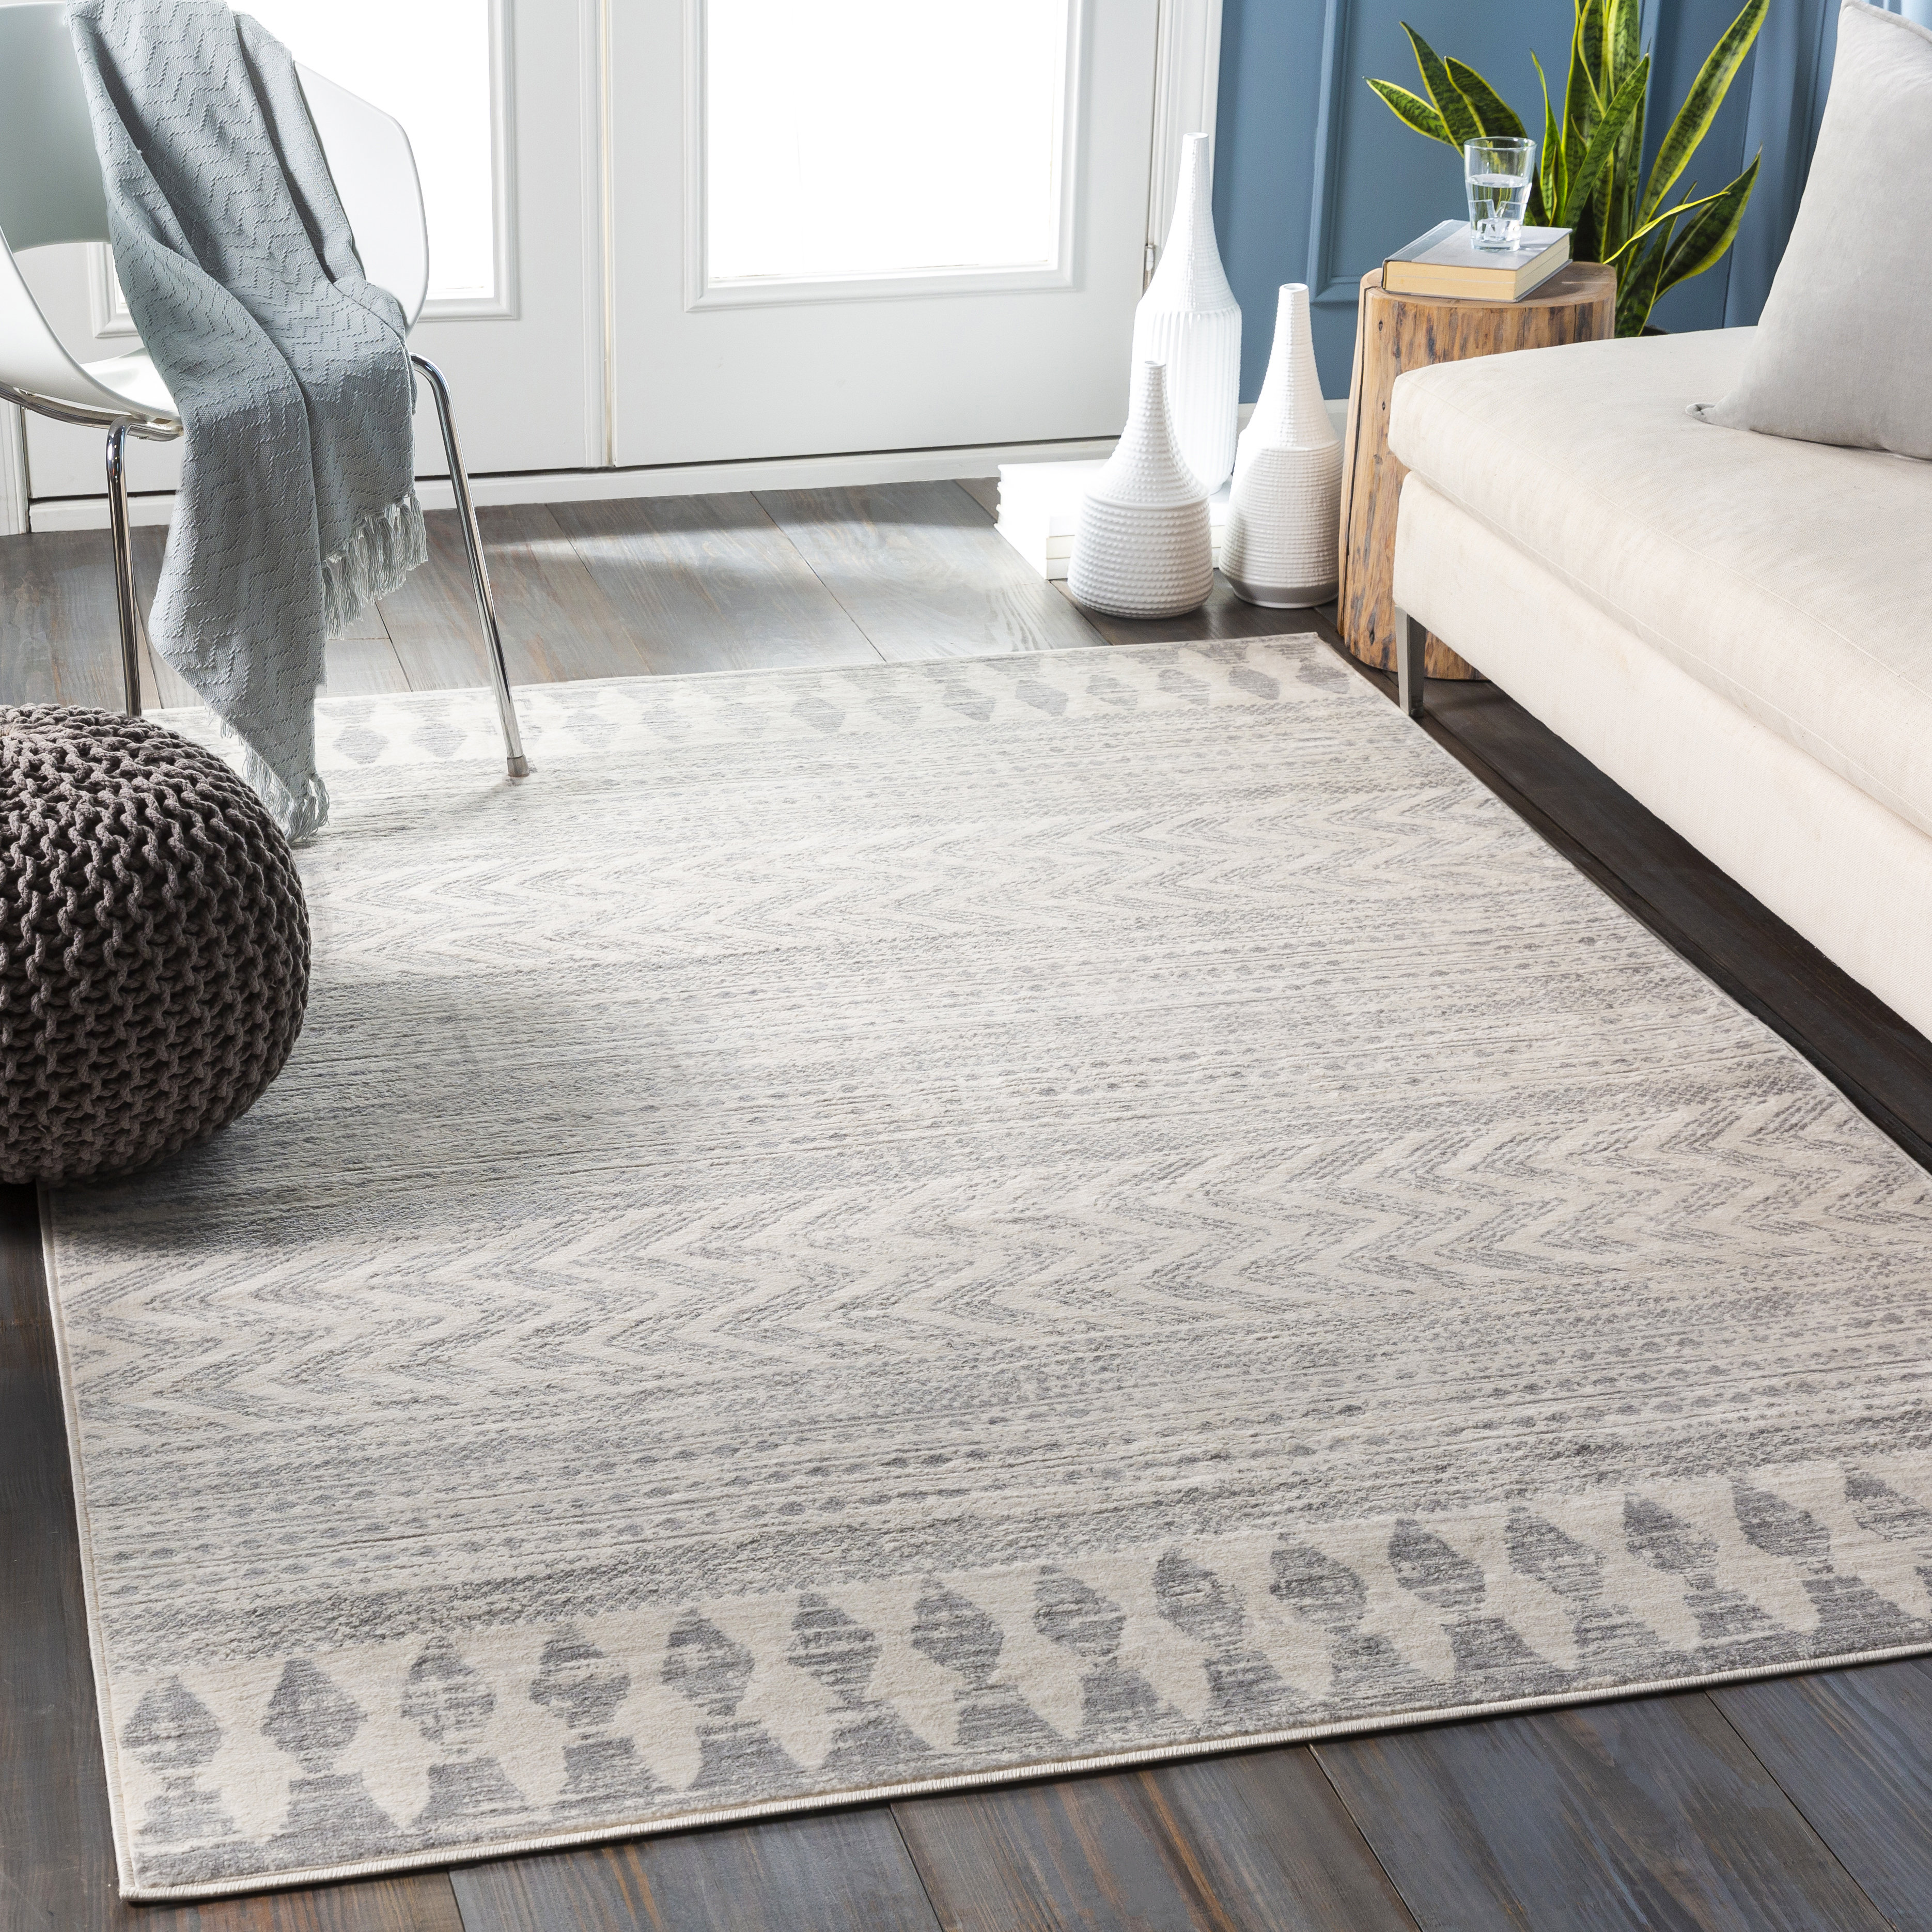 Modern Geometric Area Rug Best Rugs For Living Room Lounge Bedroom Apartment Mat 